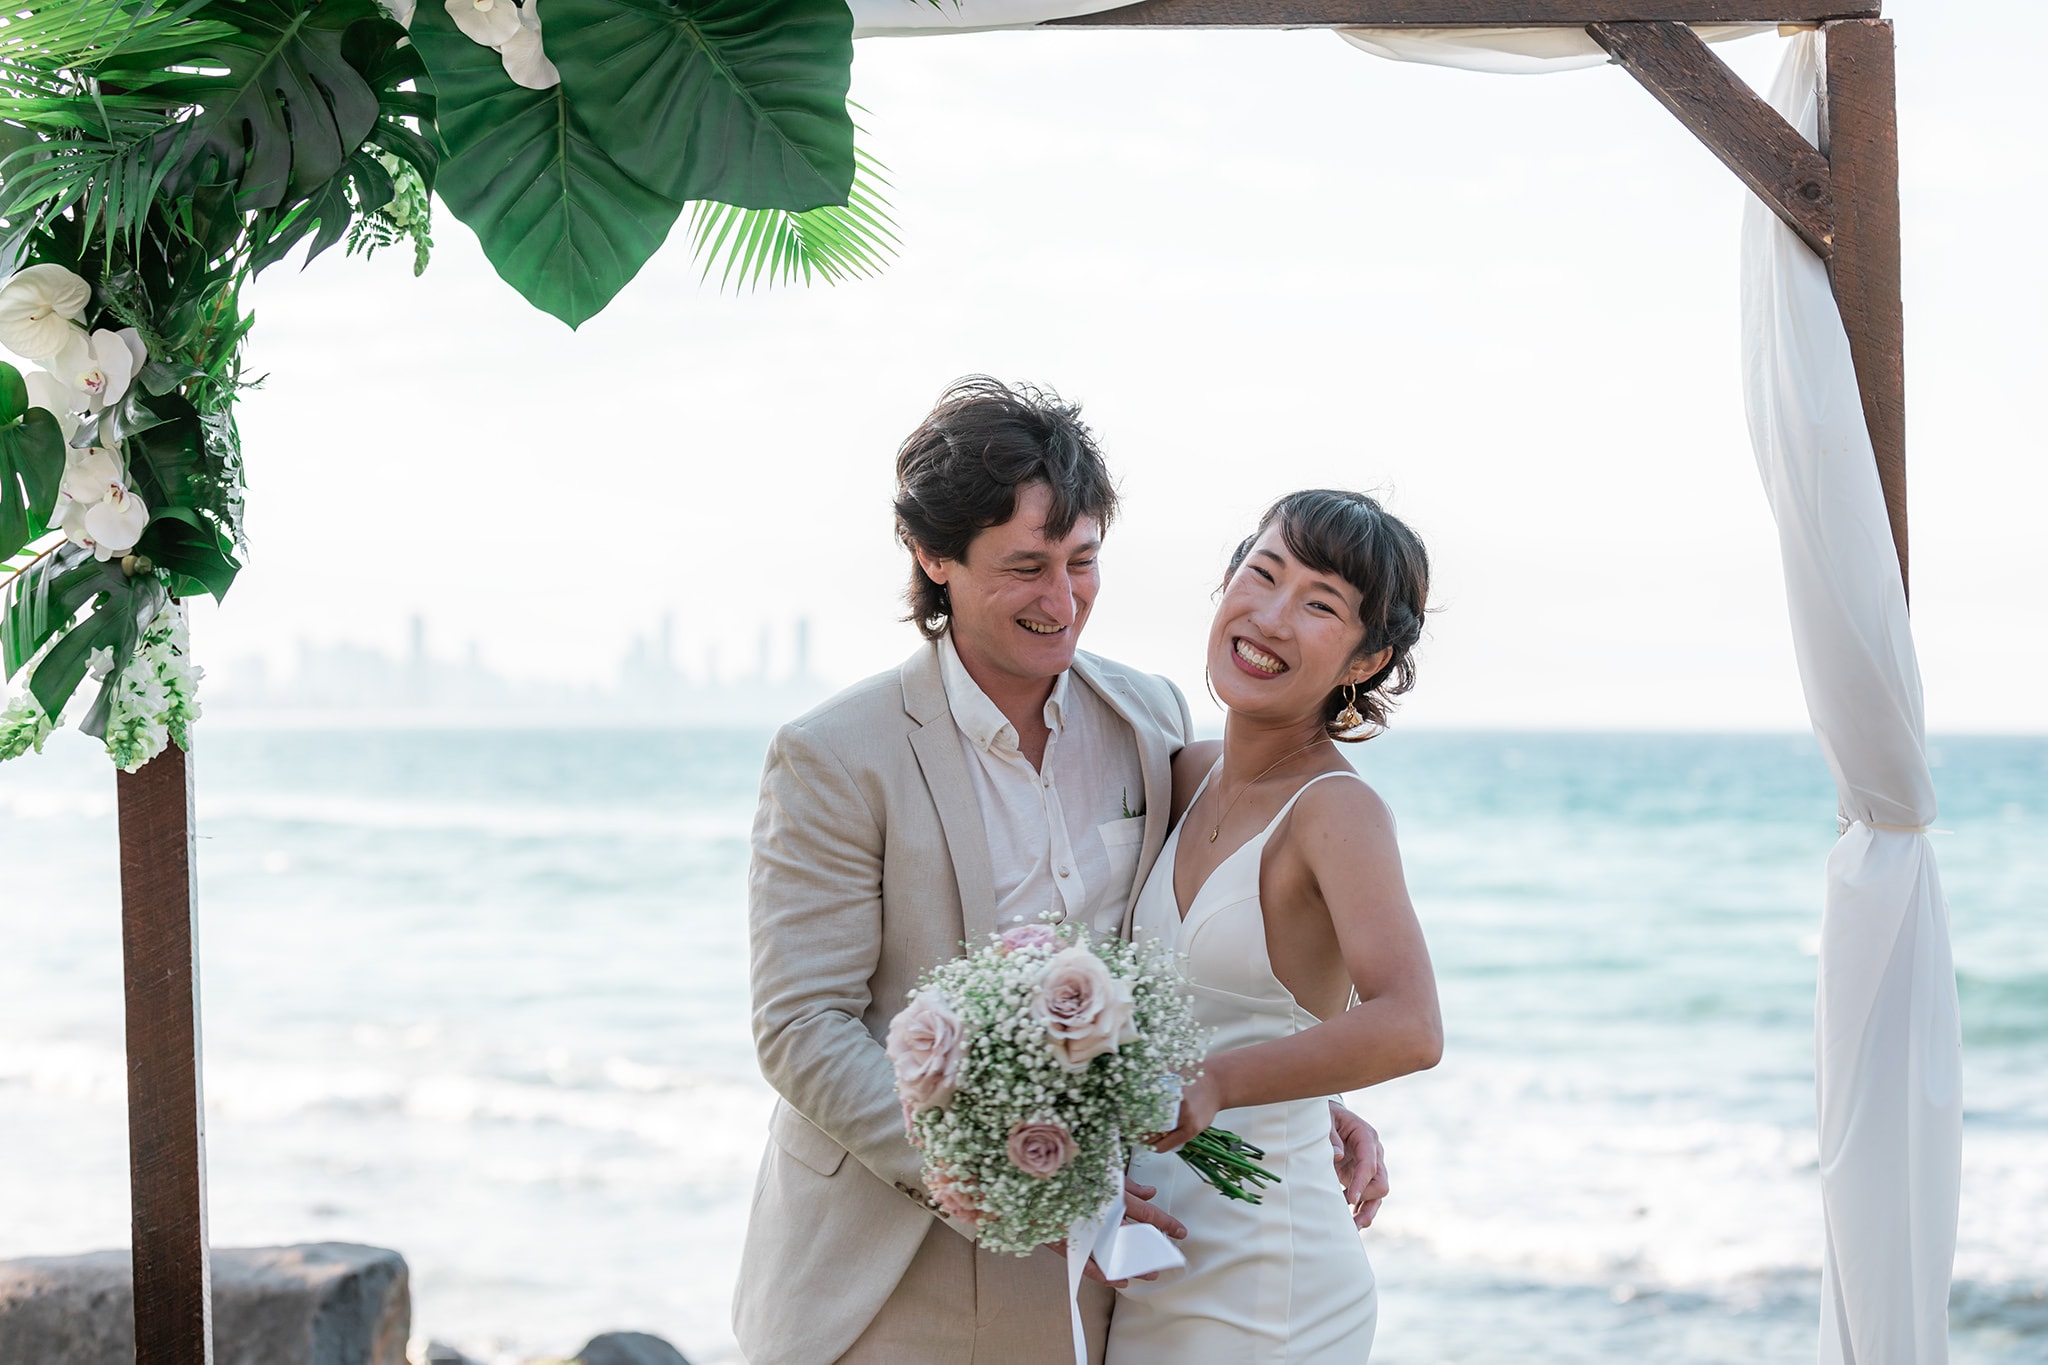 Bride and groom celebrating their wedding at Burleigh Heads on the Gold Coast.